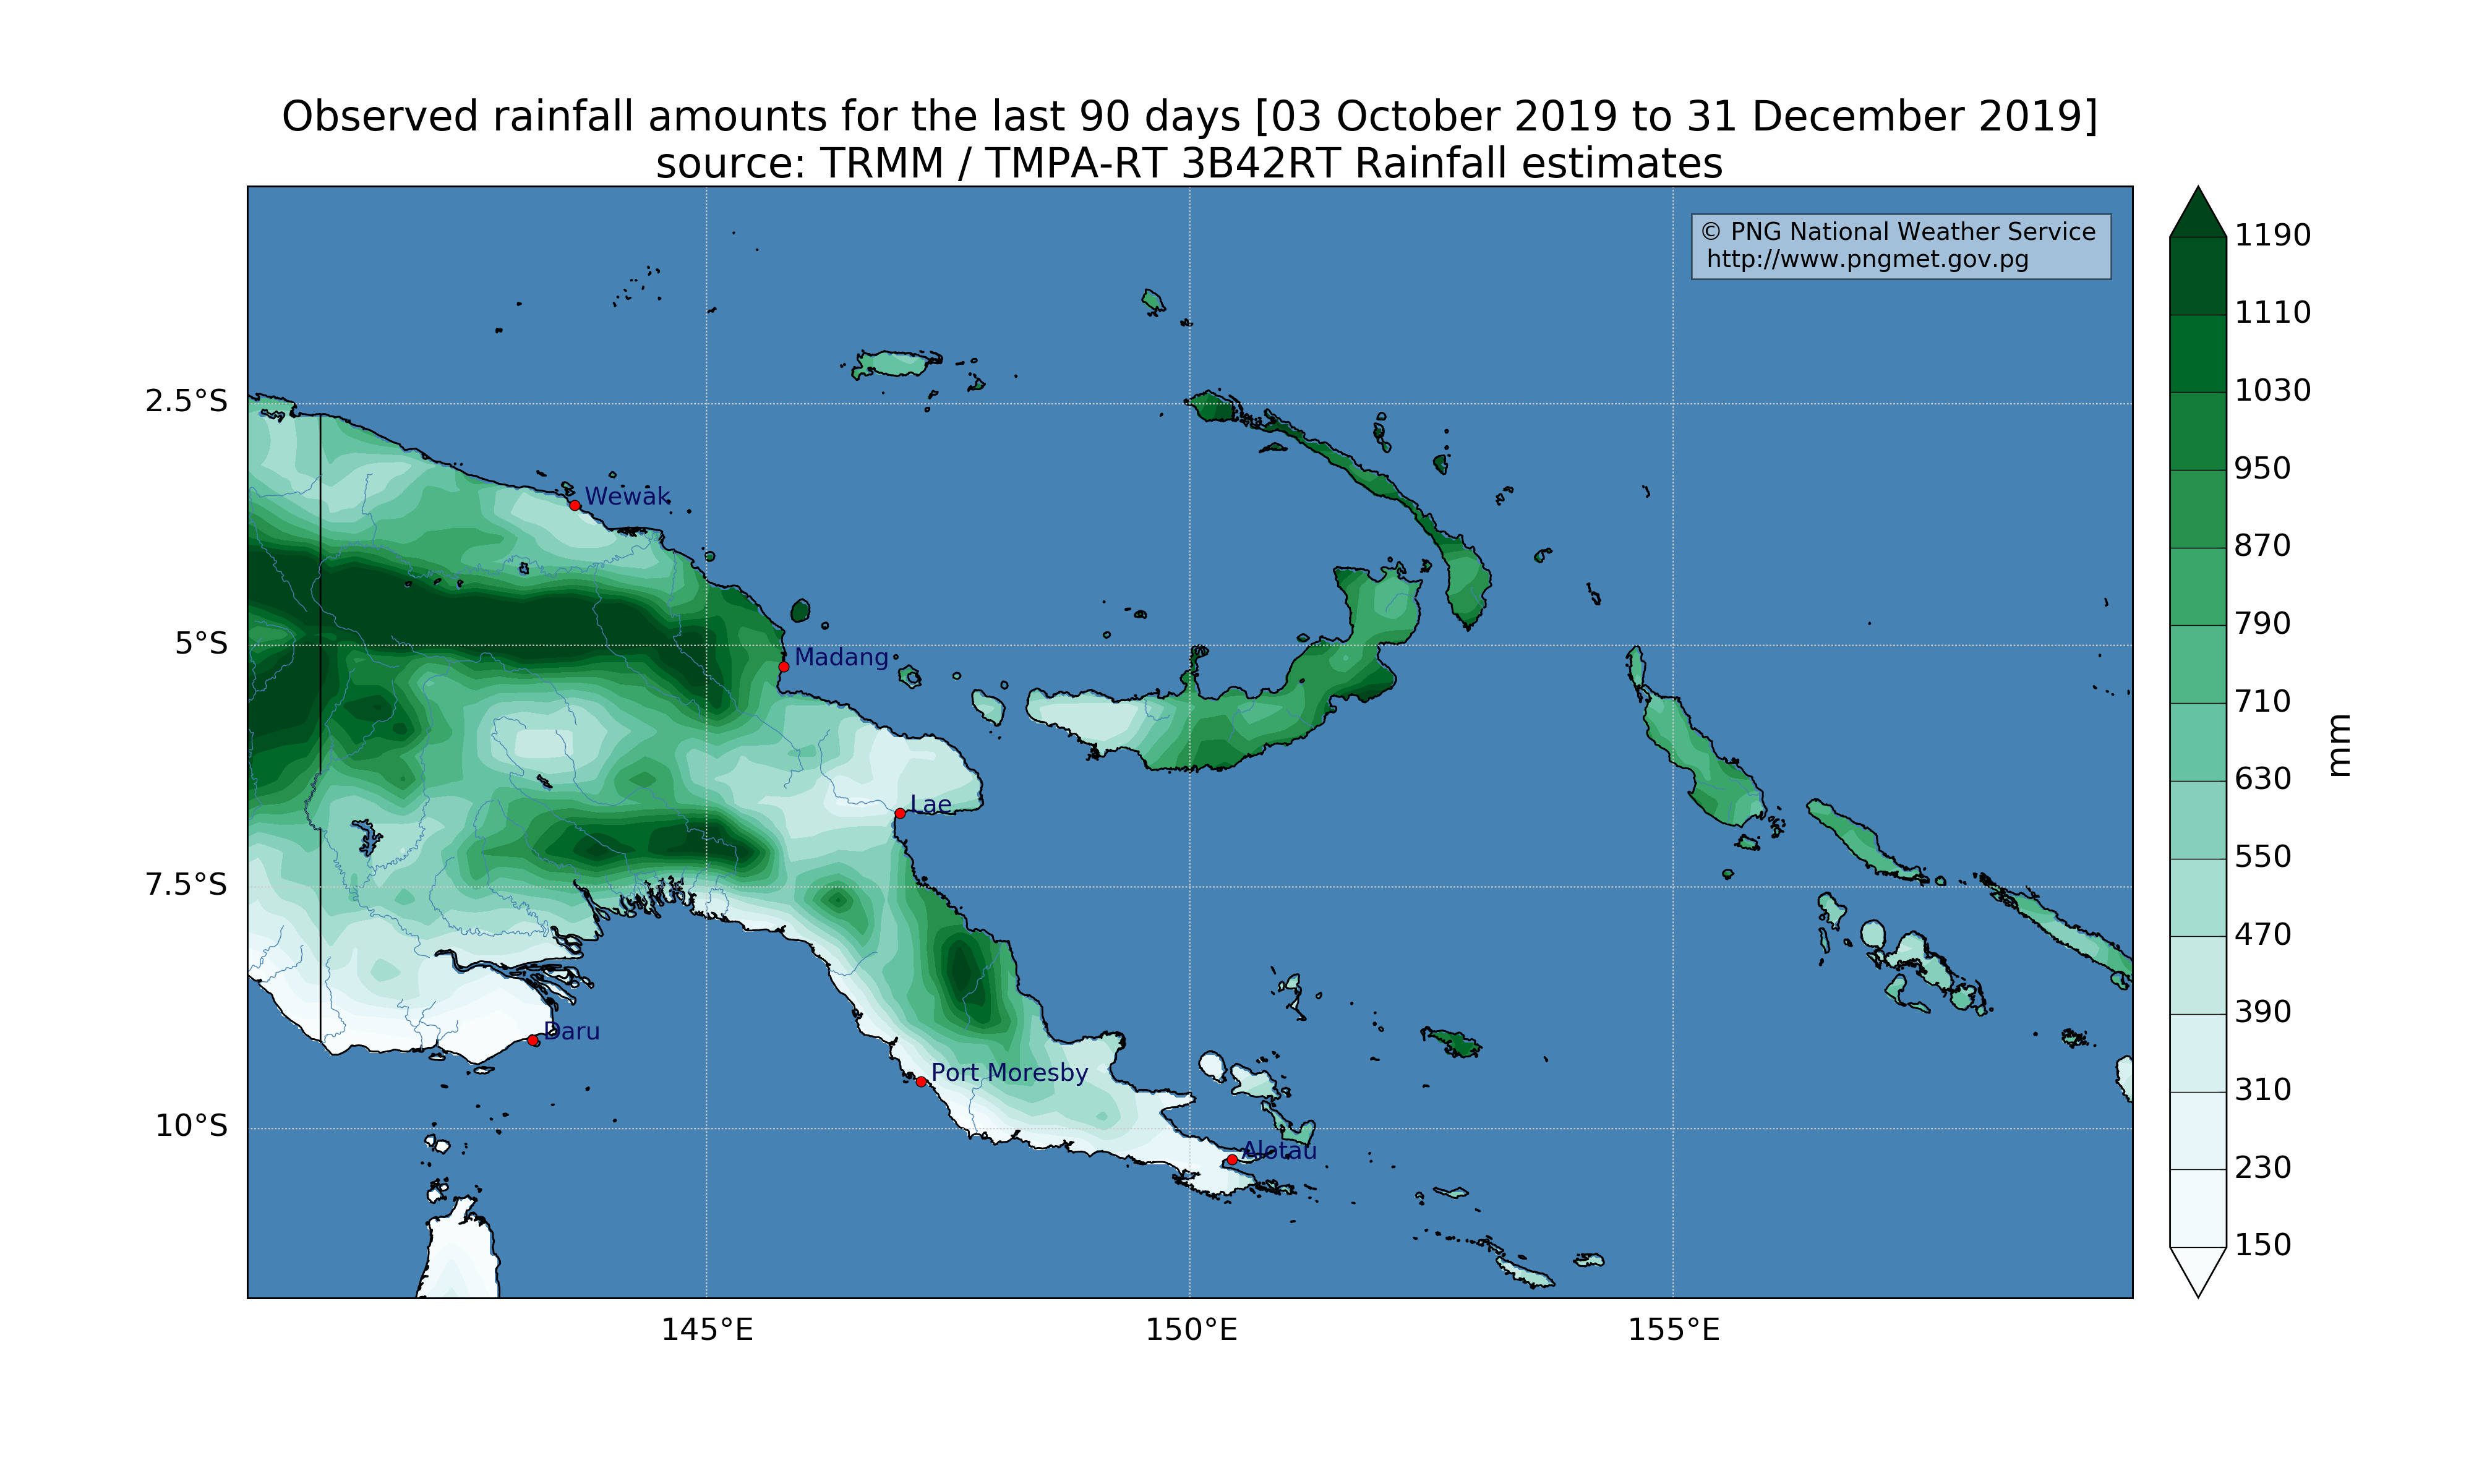 Observed rainfall for the last 90 days